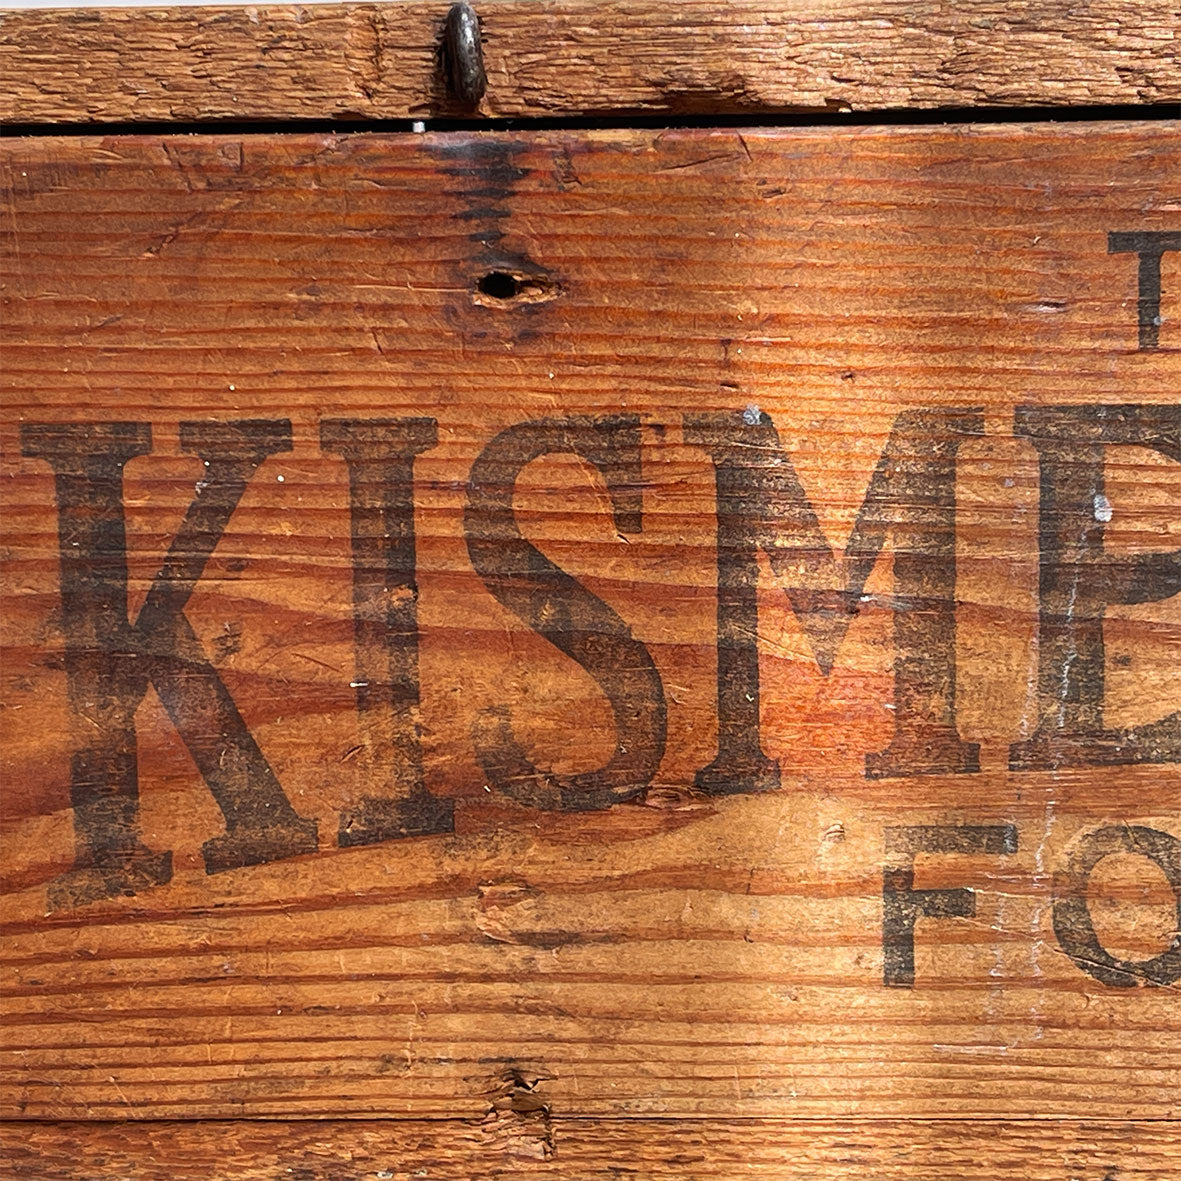 A clean example of a Kismet Junior Foot Pump Box. Great typography to the sides. - SHOP NOW - www.intovintage.co.uk